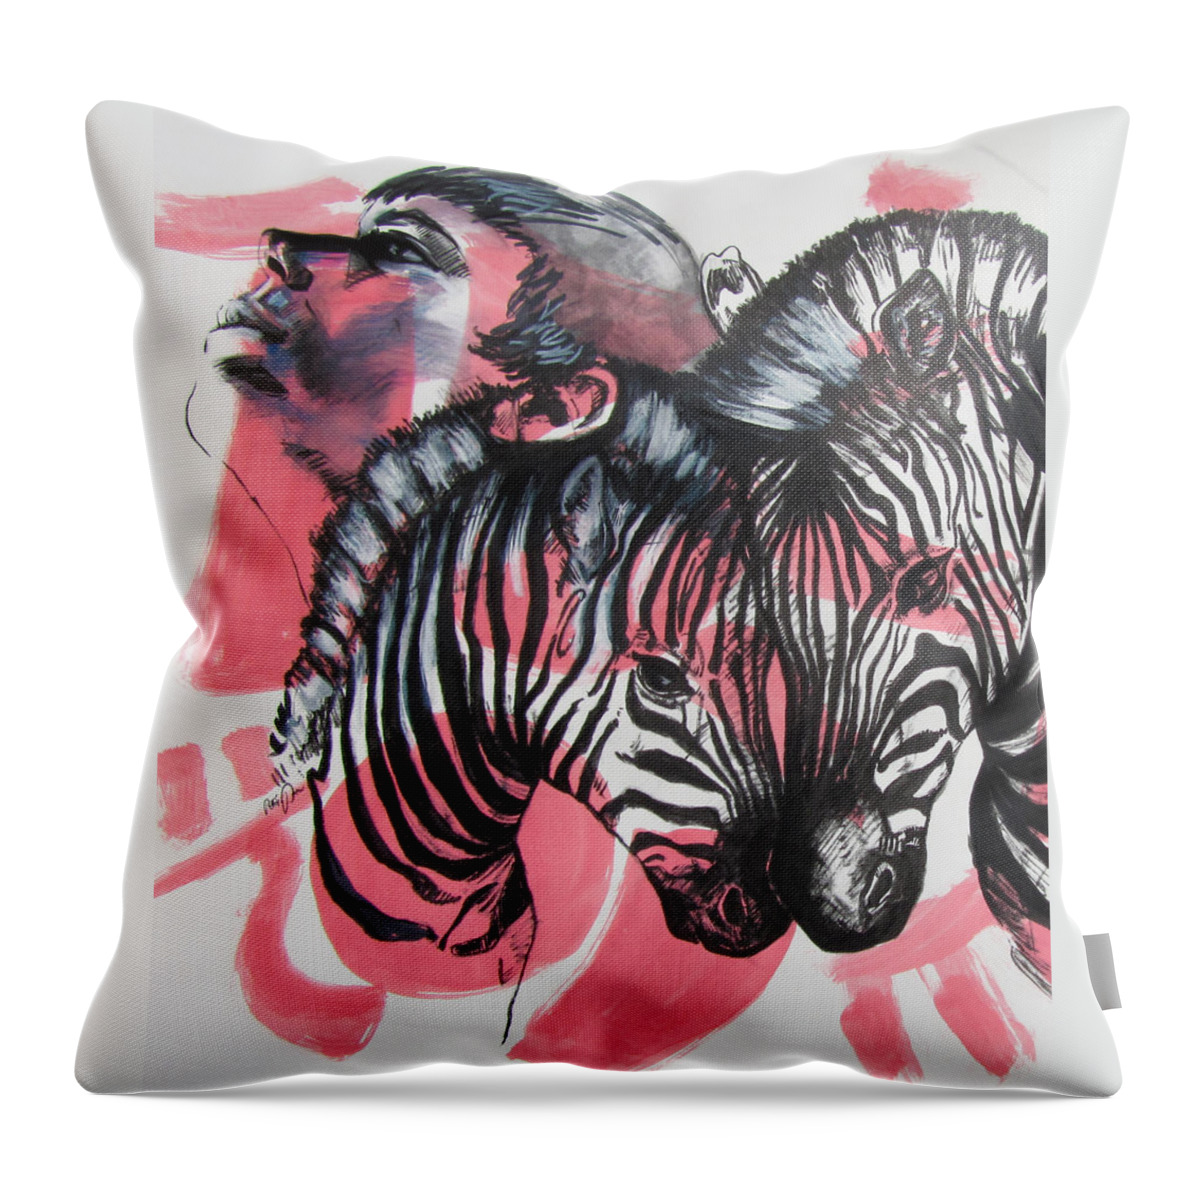 Striped Zebra Throw Pillow featuring the painting Between Stripes by Rene Capone